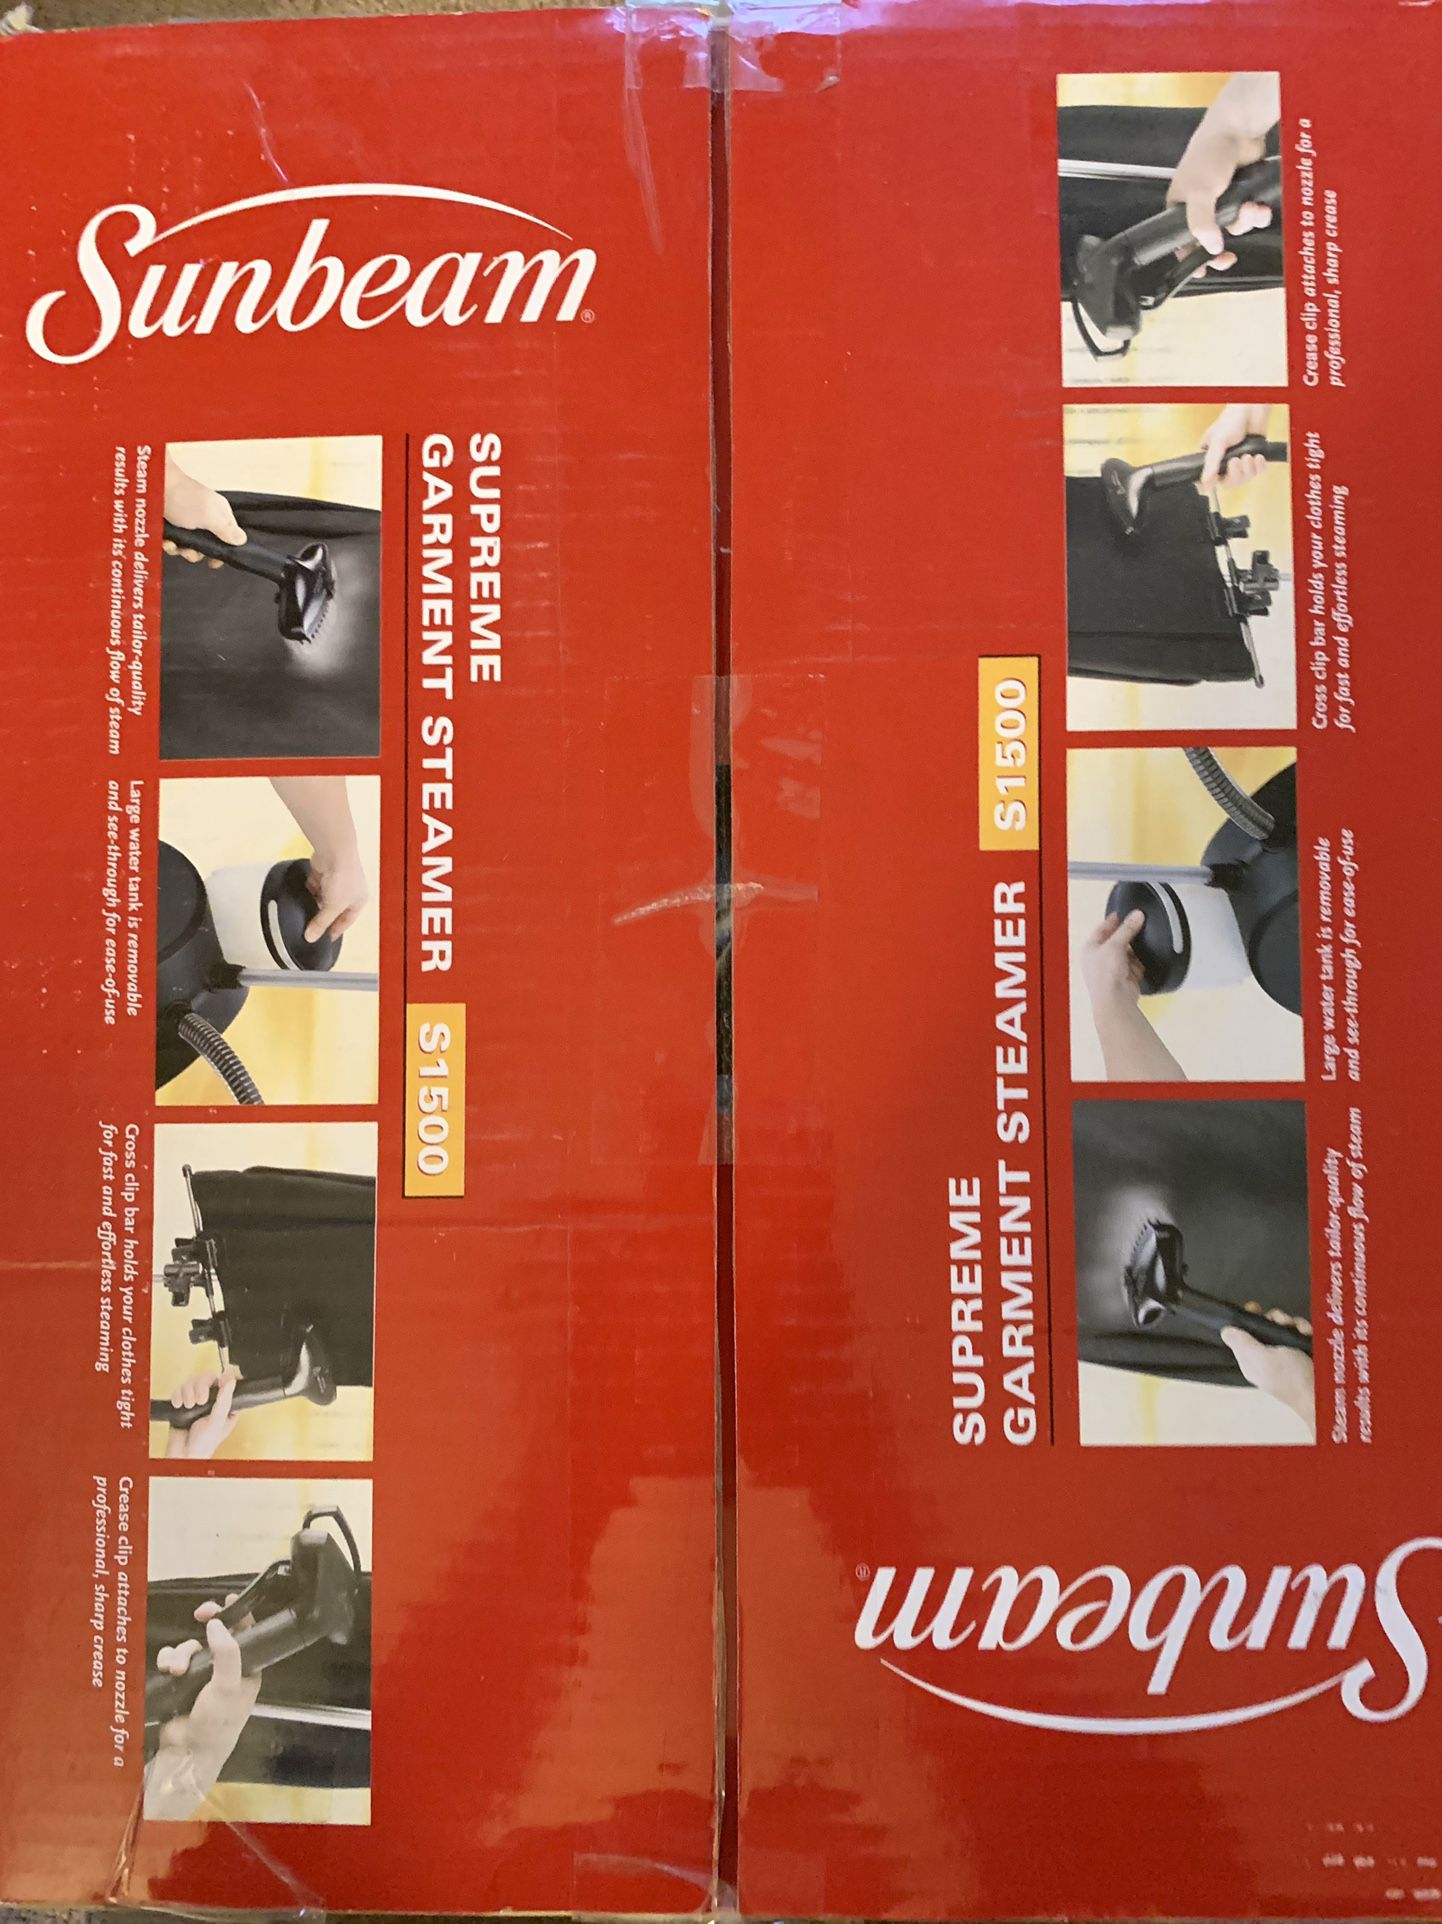 Sunbeam Supreme Garment Steamer S1500. Excellent Condition. Hardly Used.